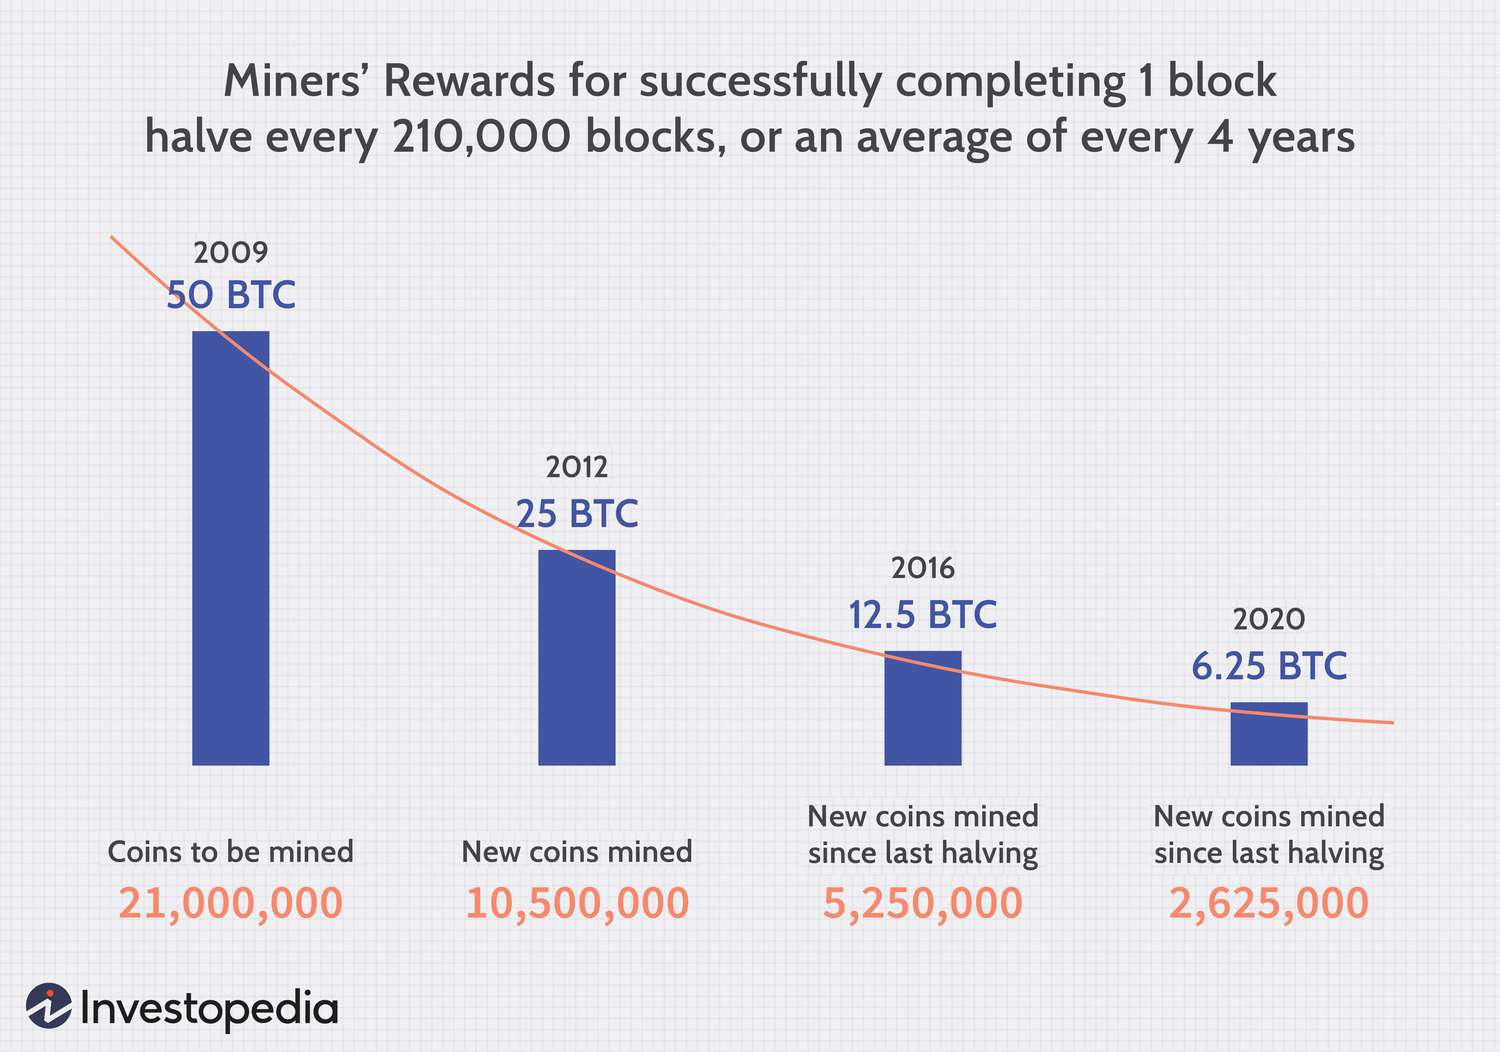 How to build a cryptomining rig: Bitcoin mining | ZDNET